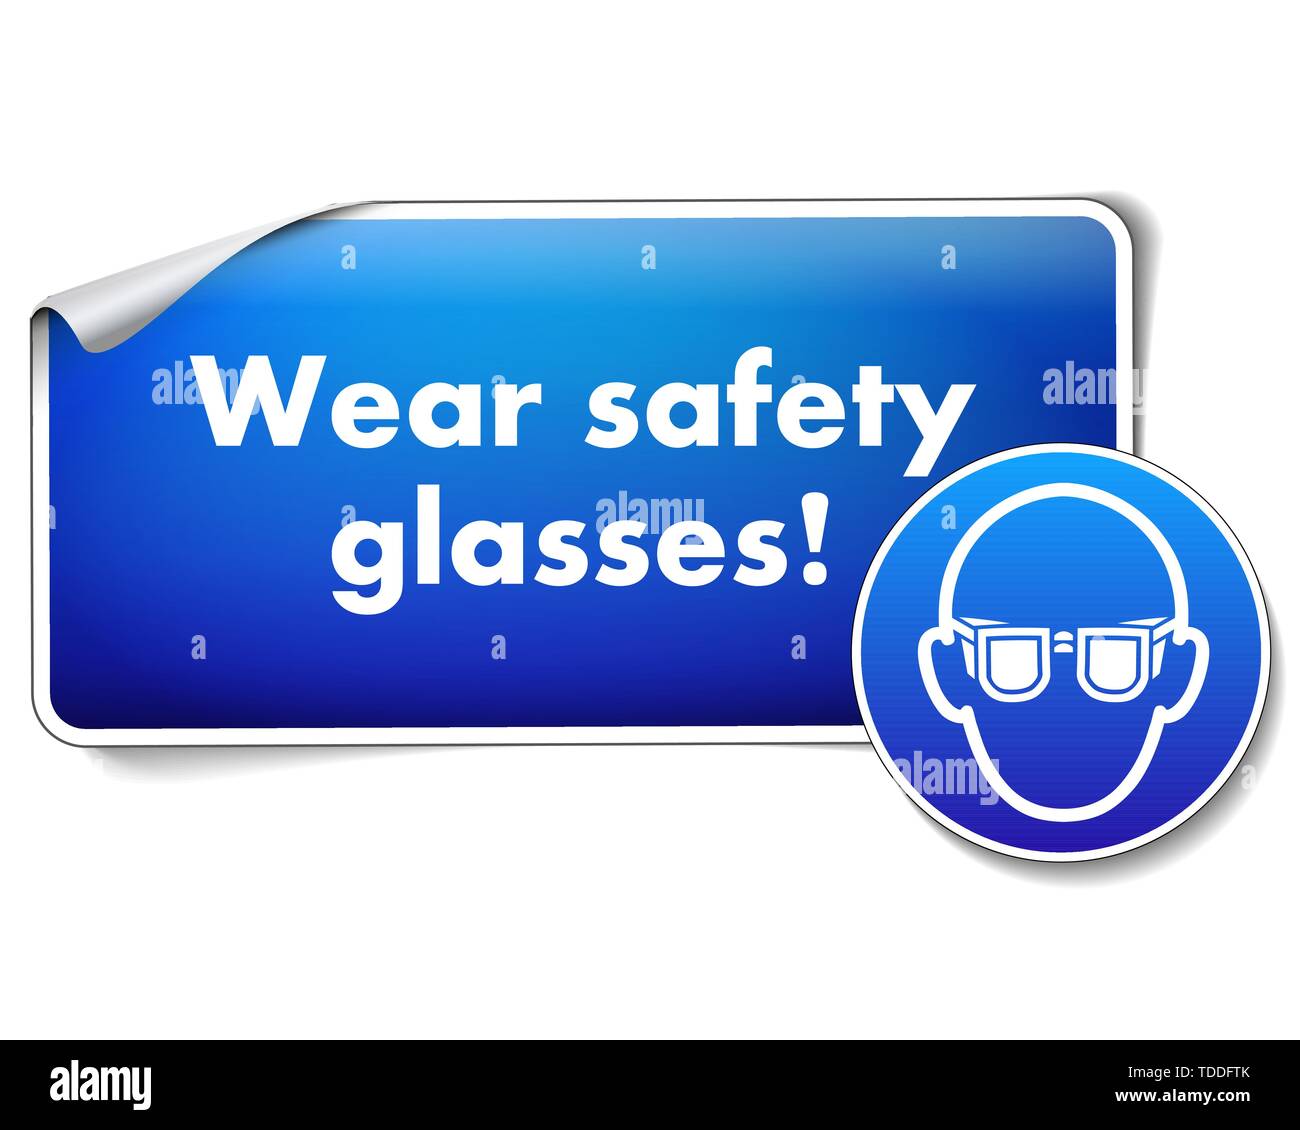 Wear safety glasses sign with sticker isolated on white background Stock Vector